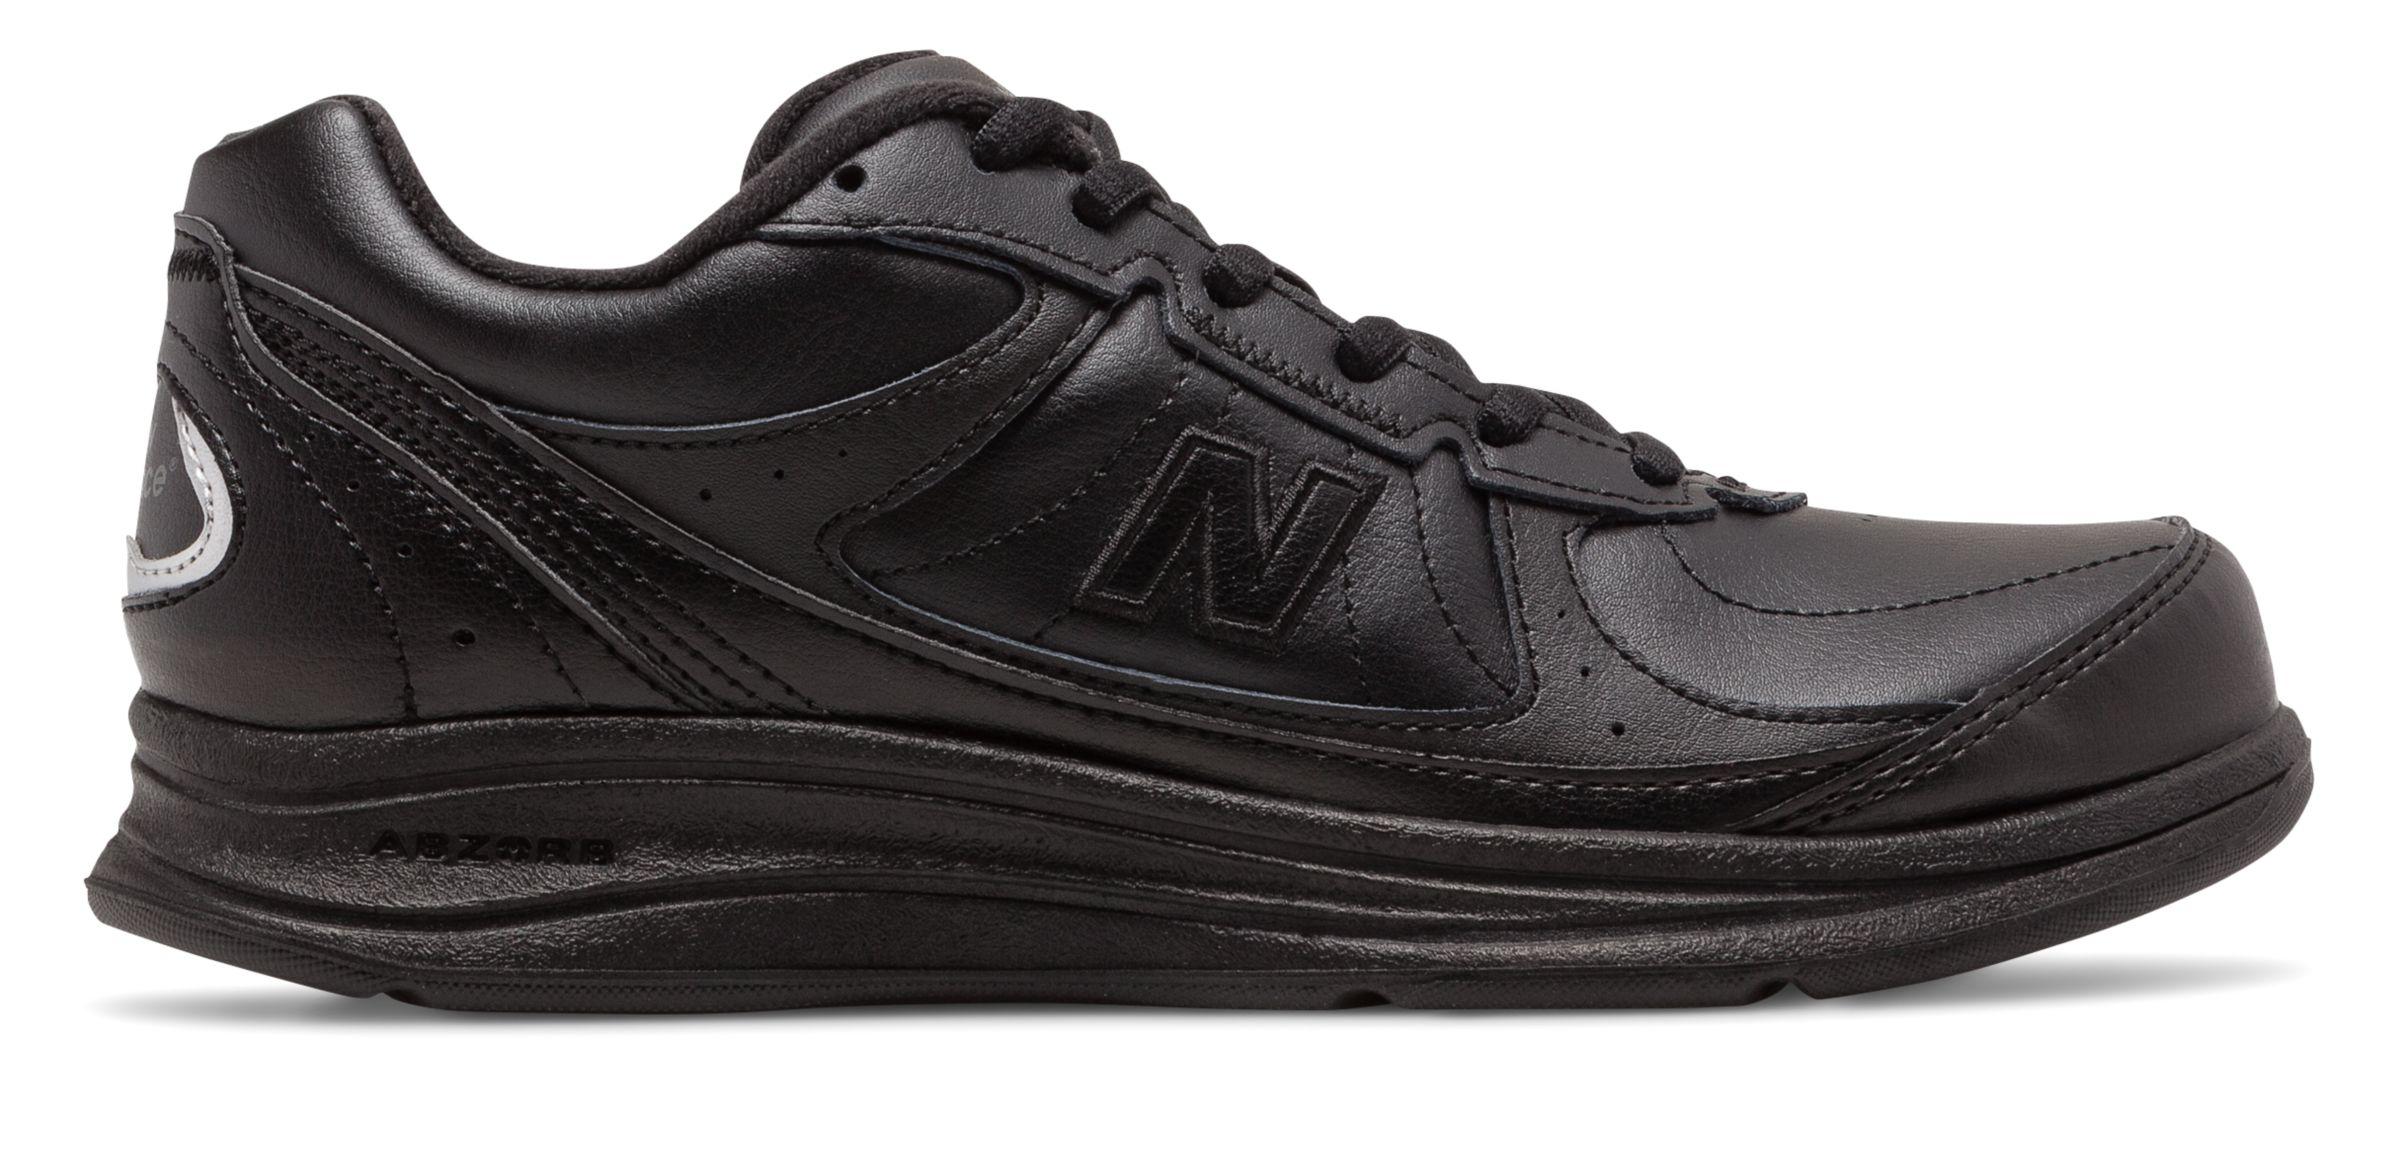 New Balance Leather 577 in Black Lace (Black) - Lyst